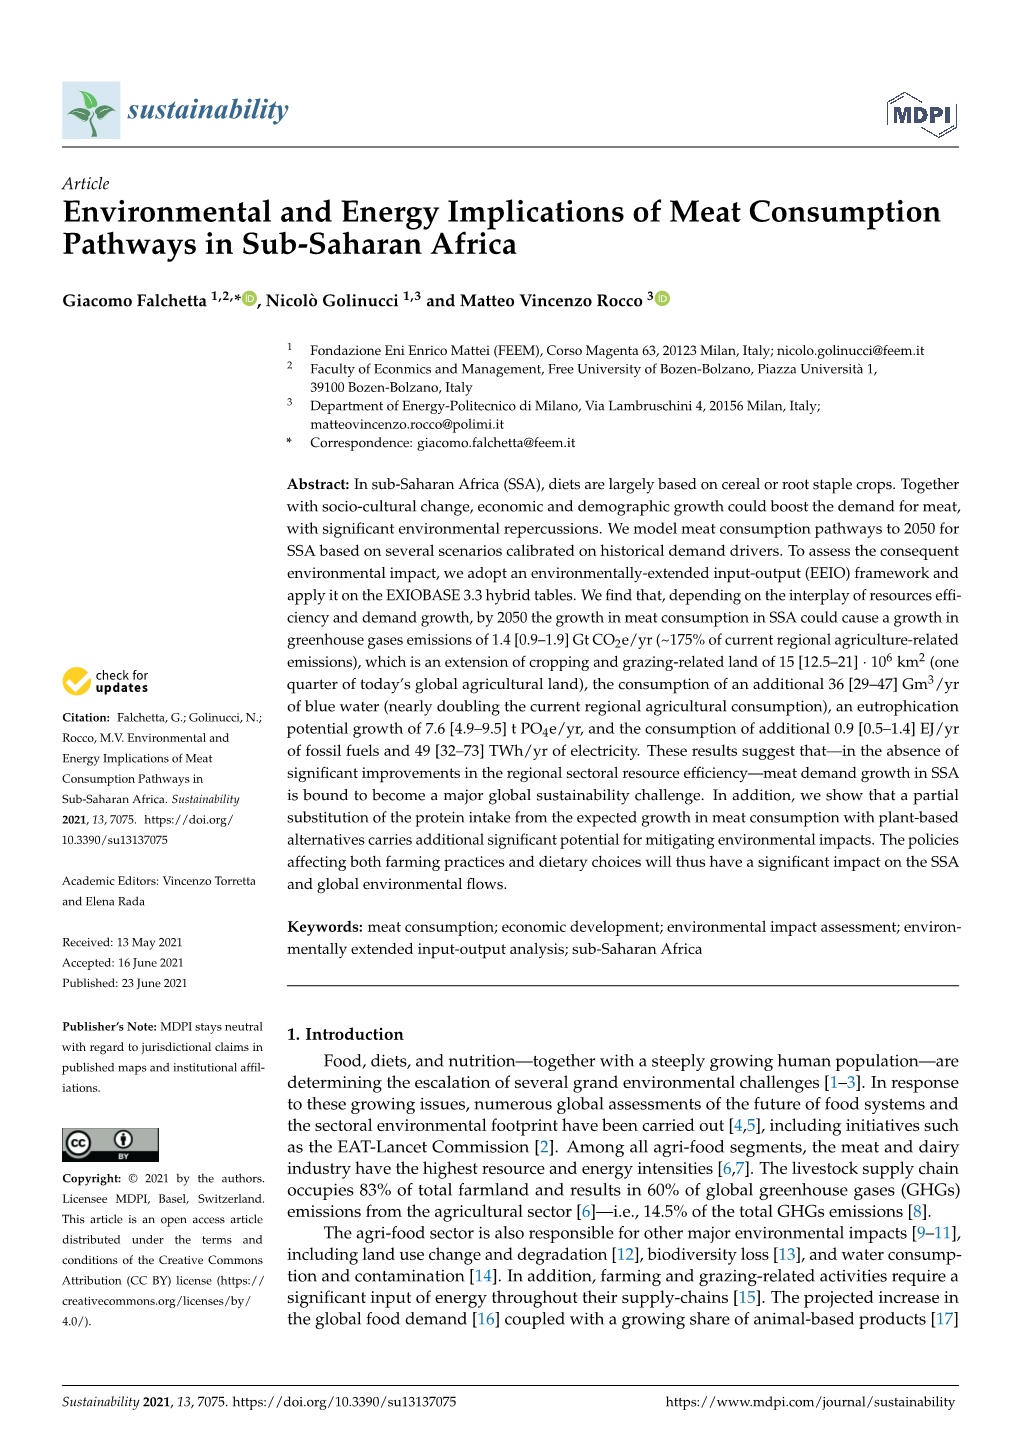 Environmental and Energy Implications of Meat Consumption Pathways in Sub-Saharan Africa